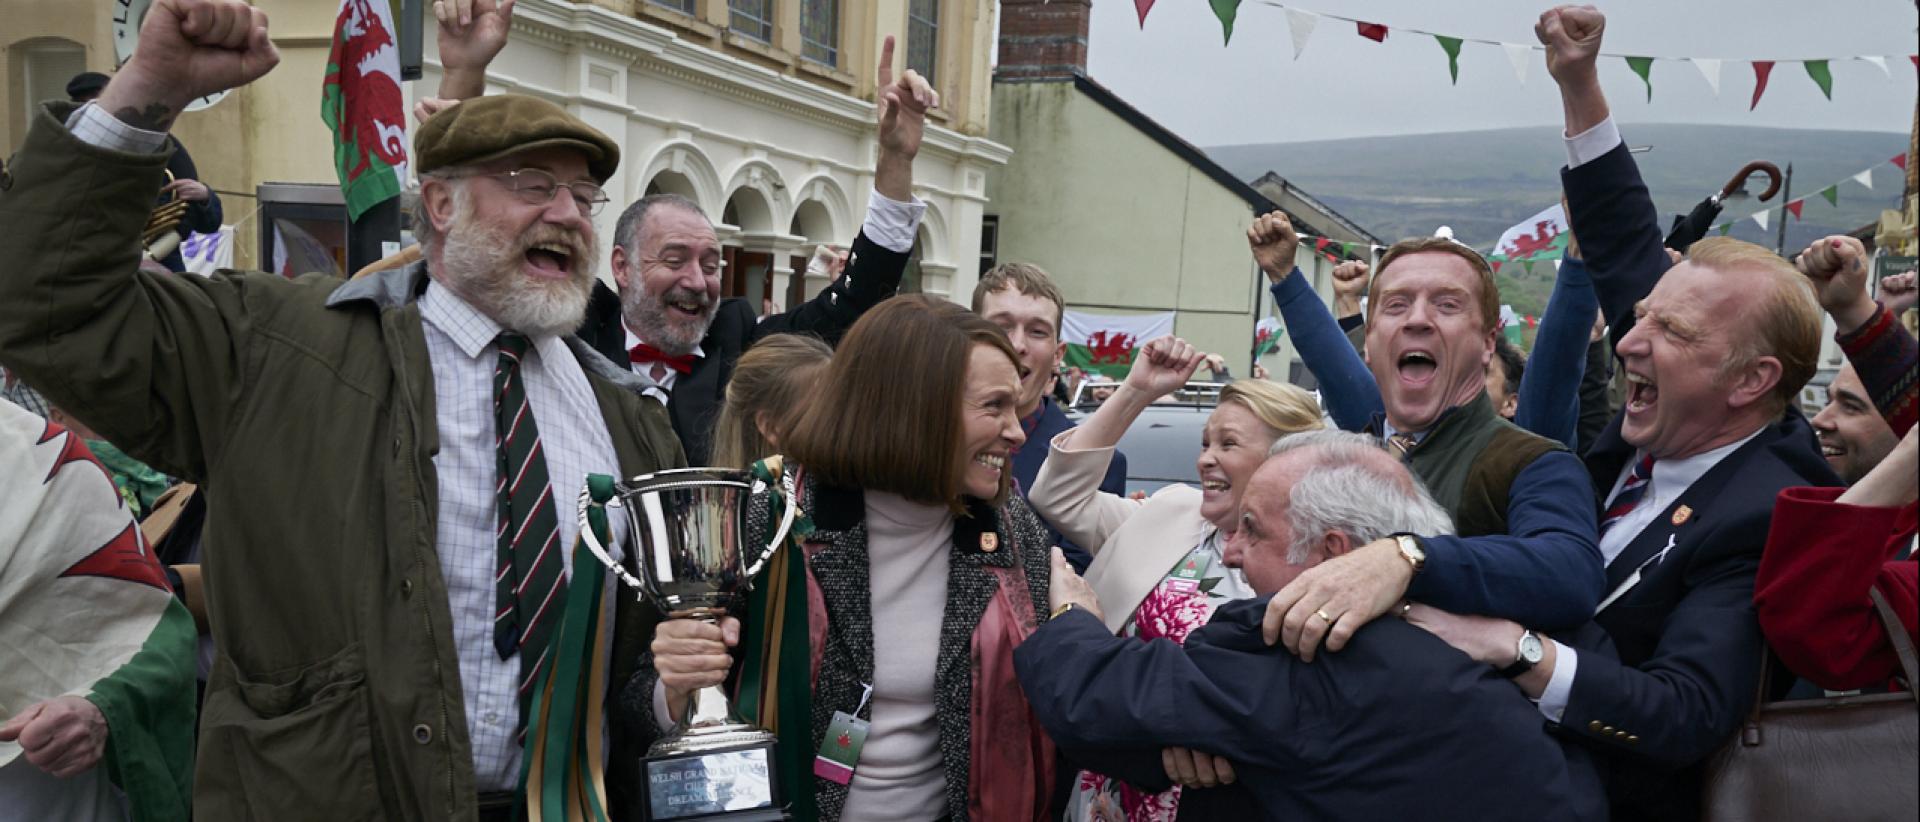 still from dream horse featuring toni collette holding a trophy and celebrating during a street party parade